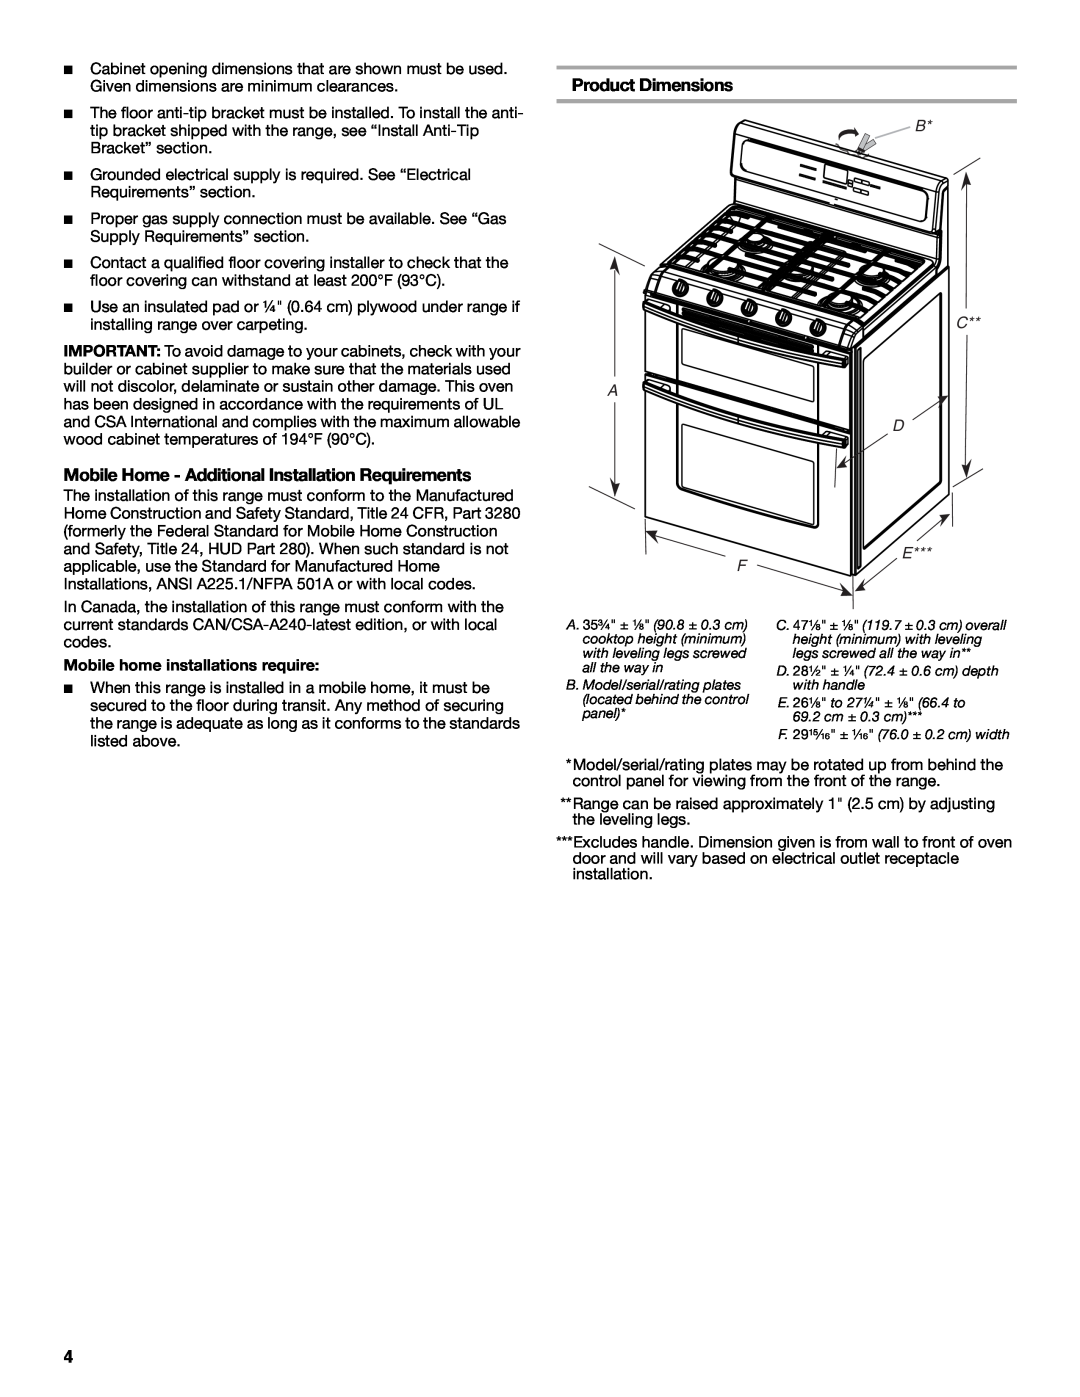 Whirlpool W10526071A installation instructions Product Dimensions, Mobile home installations require, B C A D 